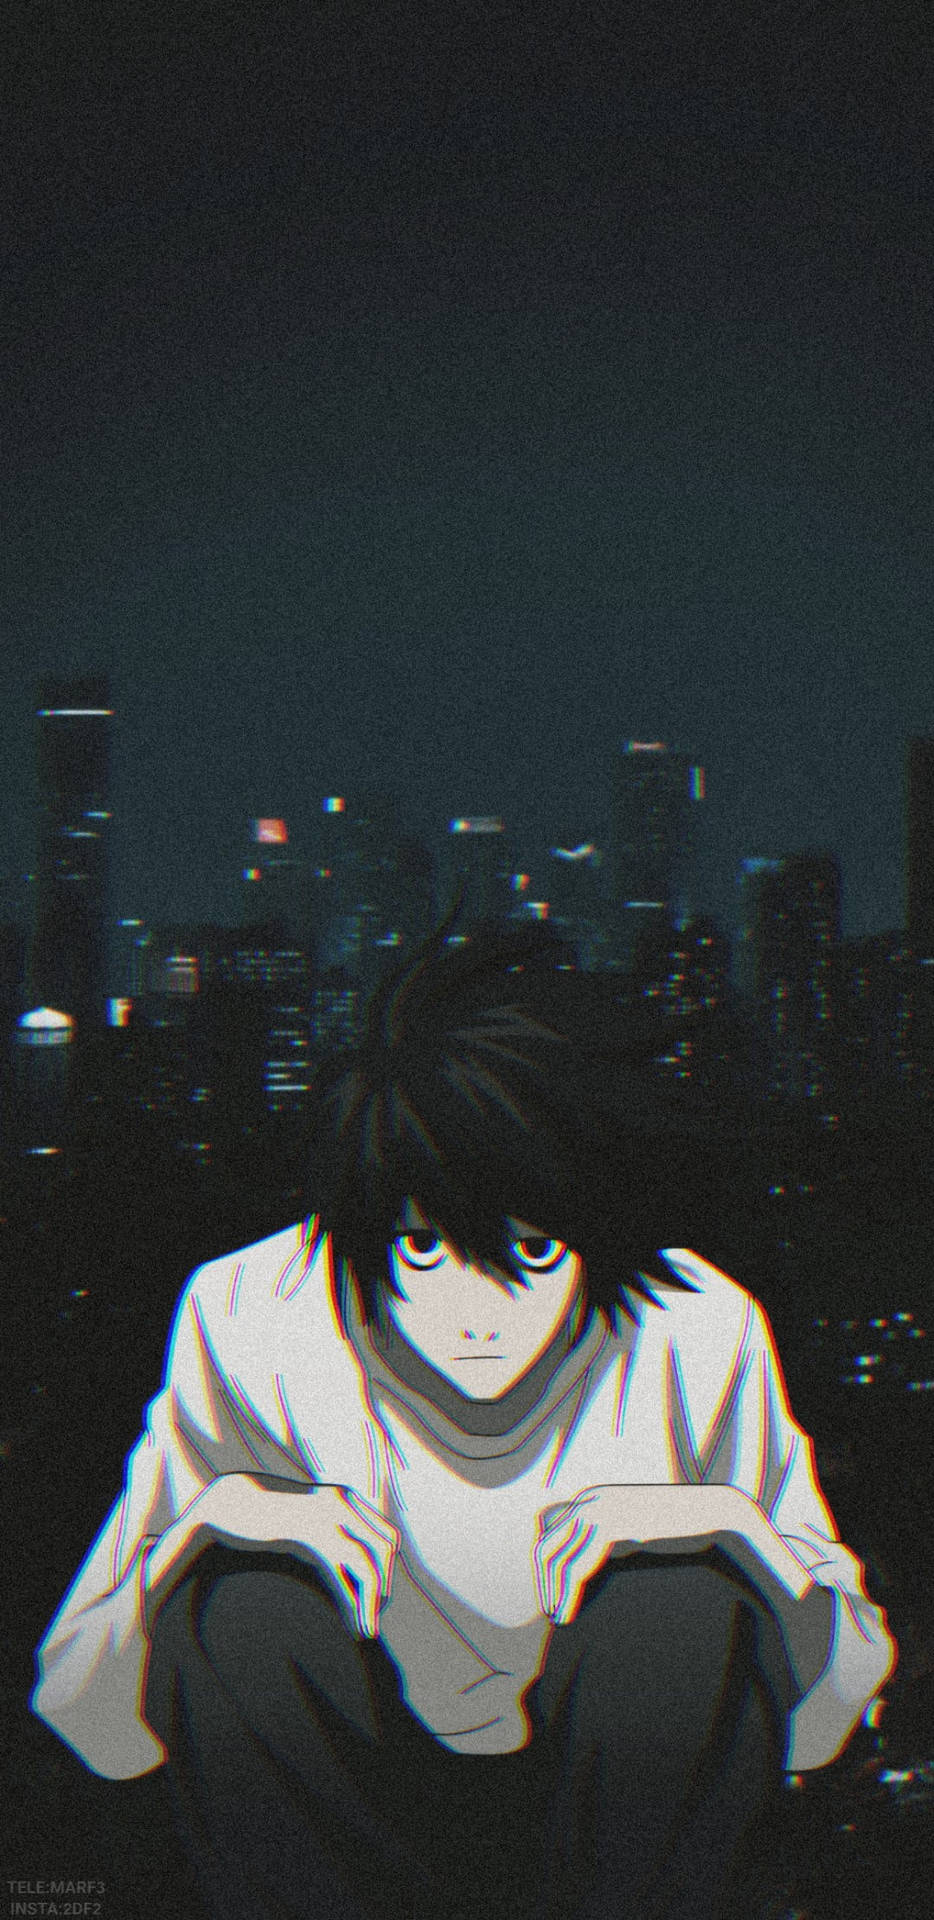 L And The City Death Note Phone Wallpaper